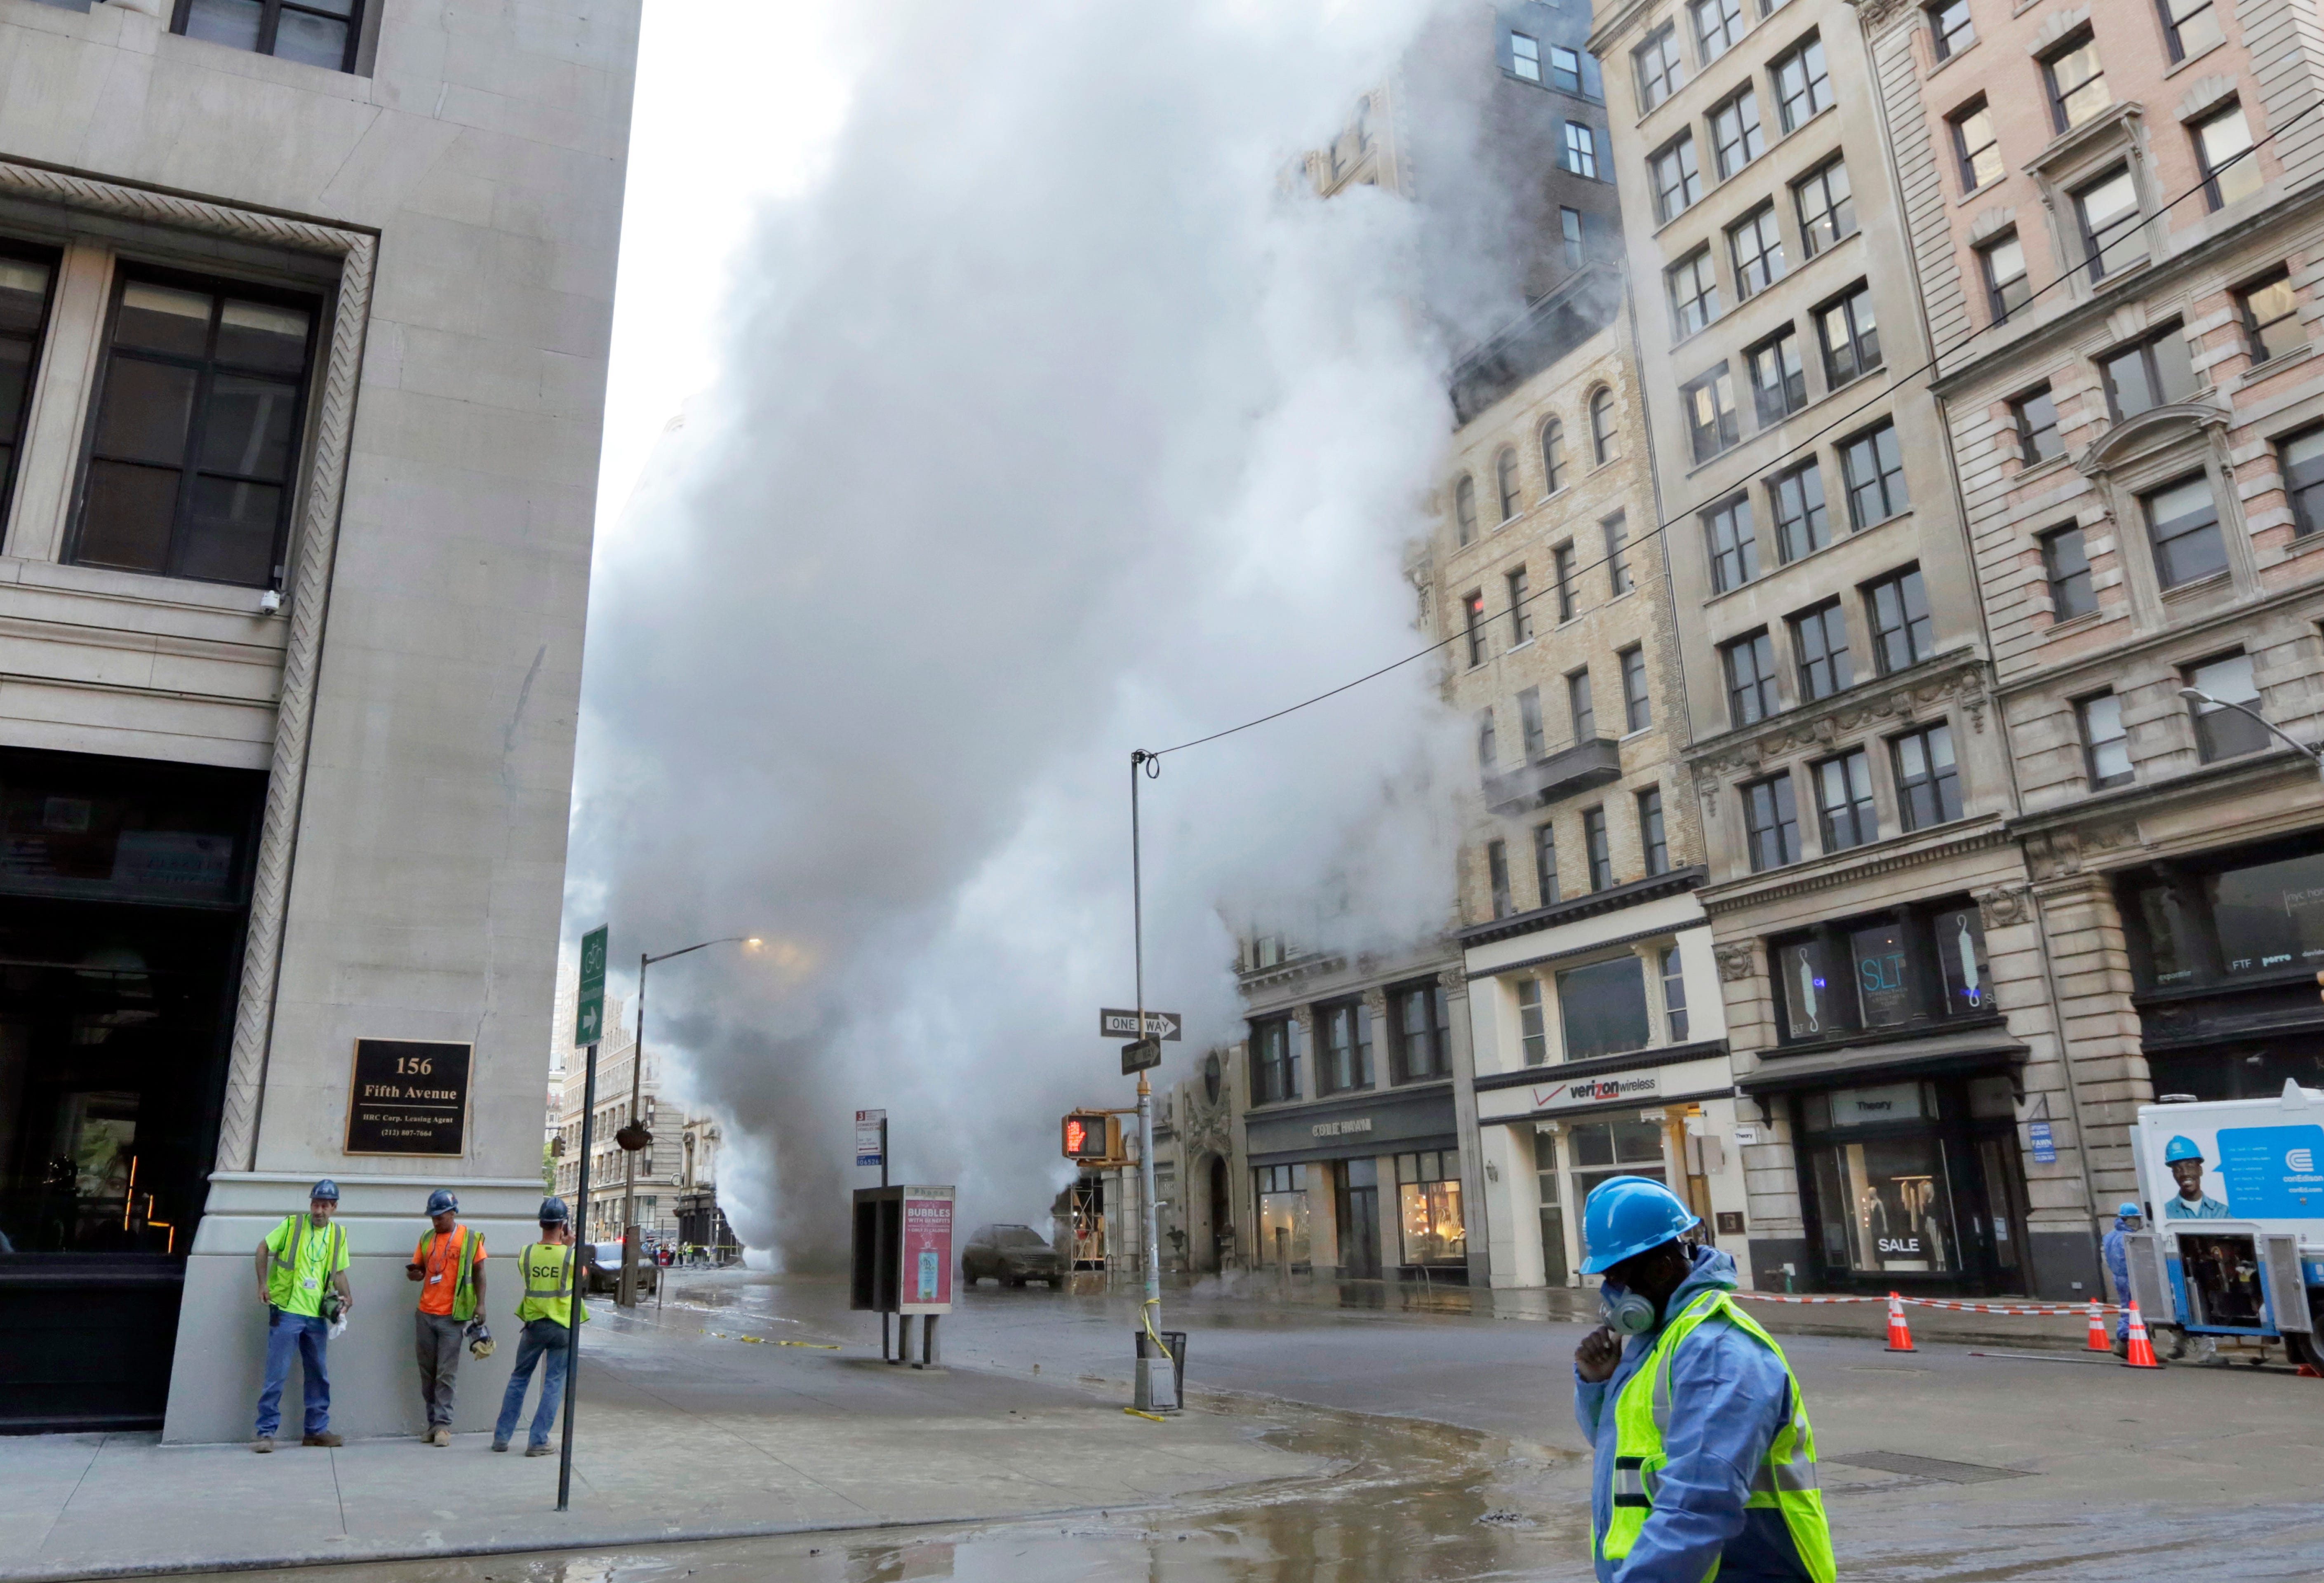 Steam billows on New York's Fifth Avenue, July 19, 2018. A steam pipe exploded beneath Fifth Avenue in Manhattan early Thursday, sending chunks of asphalt flying, a geyser of billowing white steam stories into the air and forcing pedestrians to take 